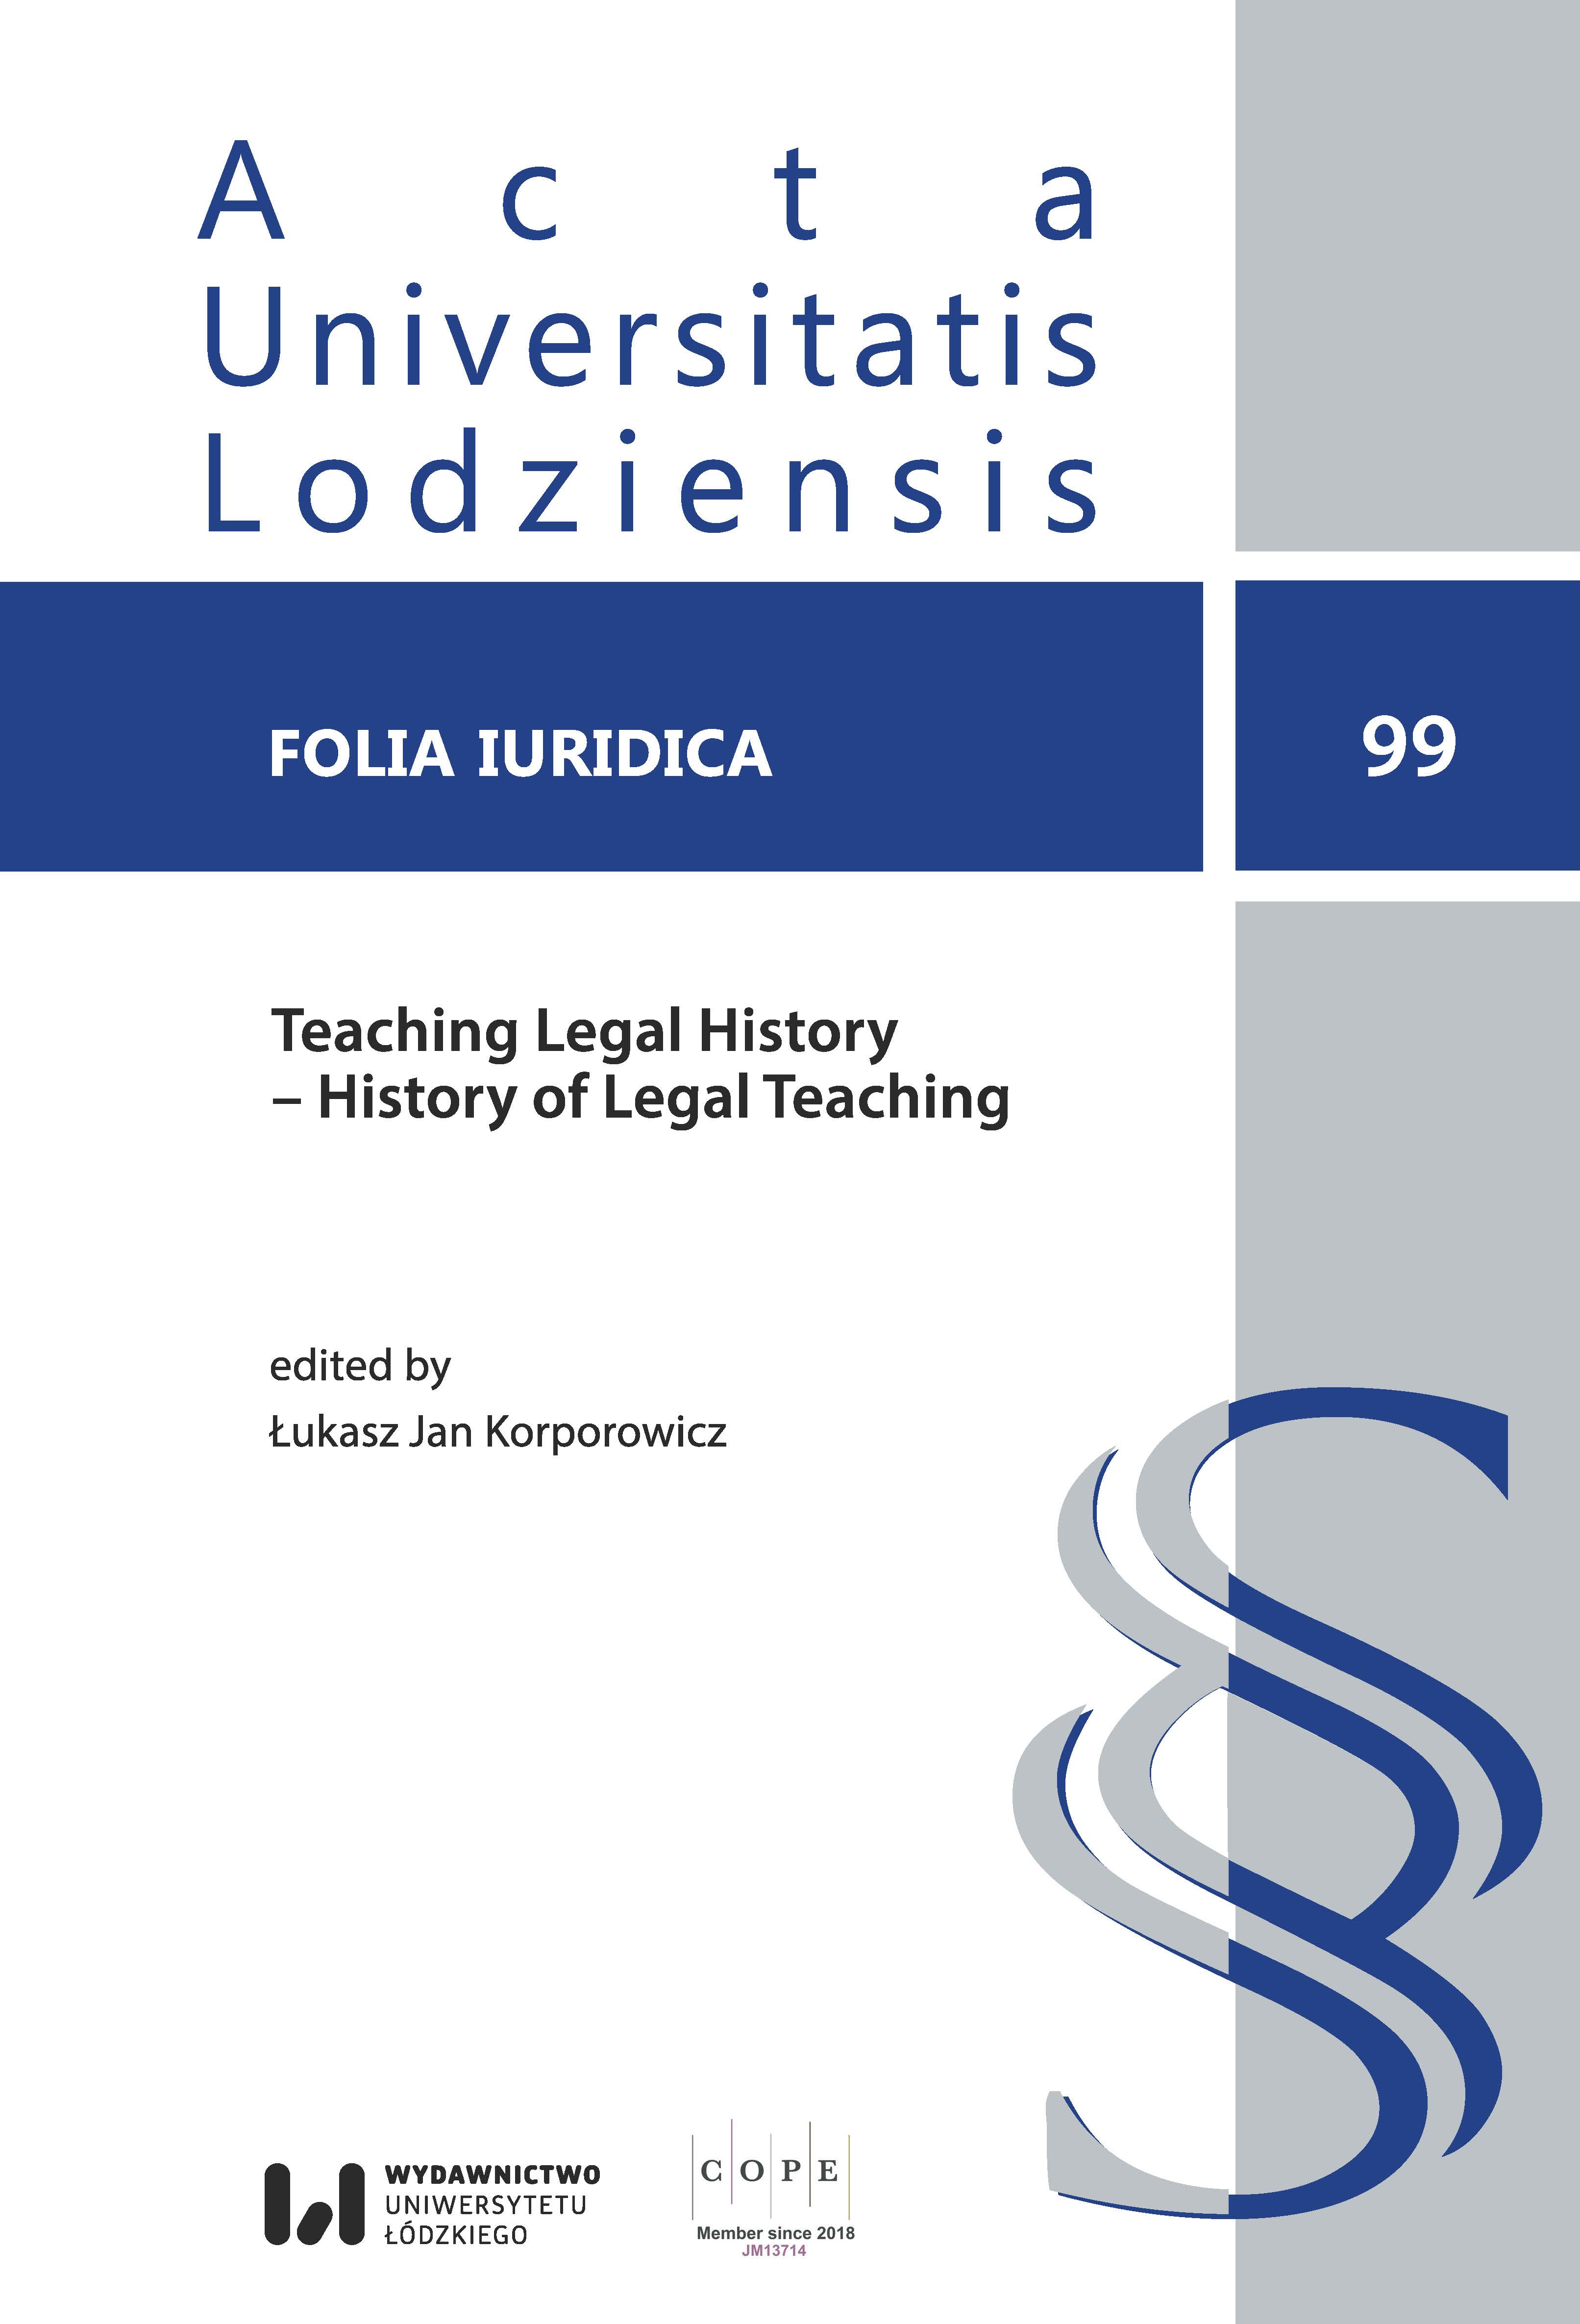 Teaching Legal History – History of Legal Teaching: Introductory Remarks